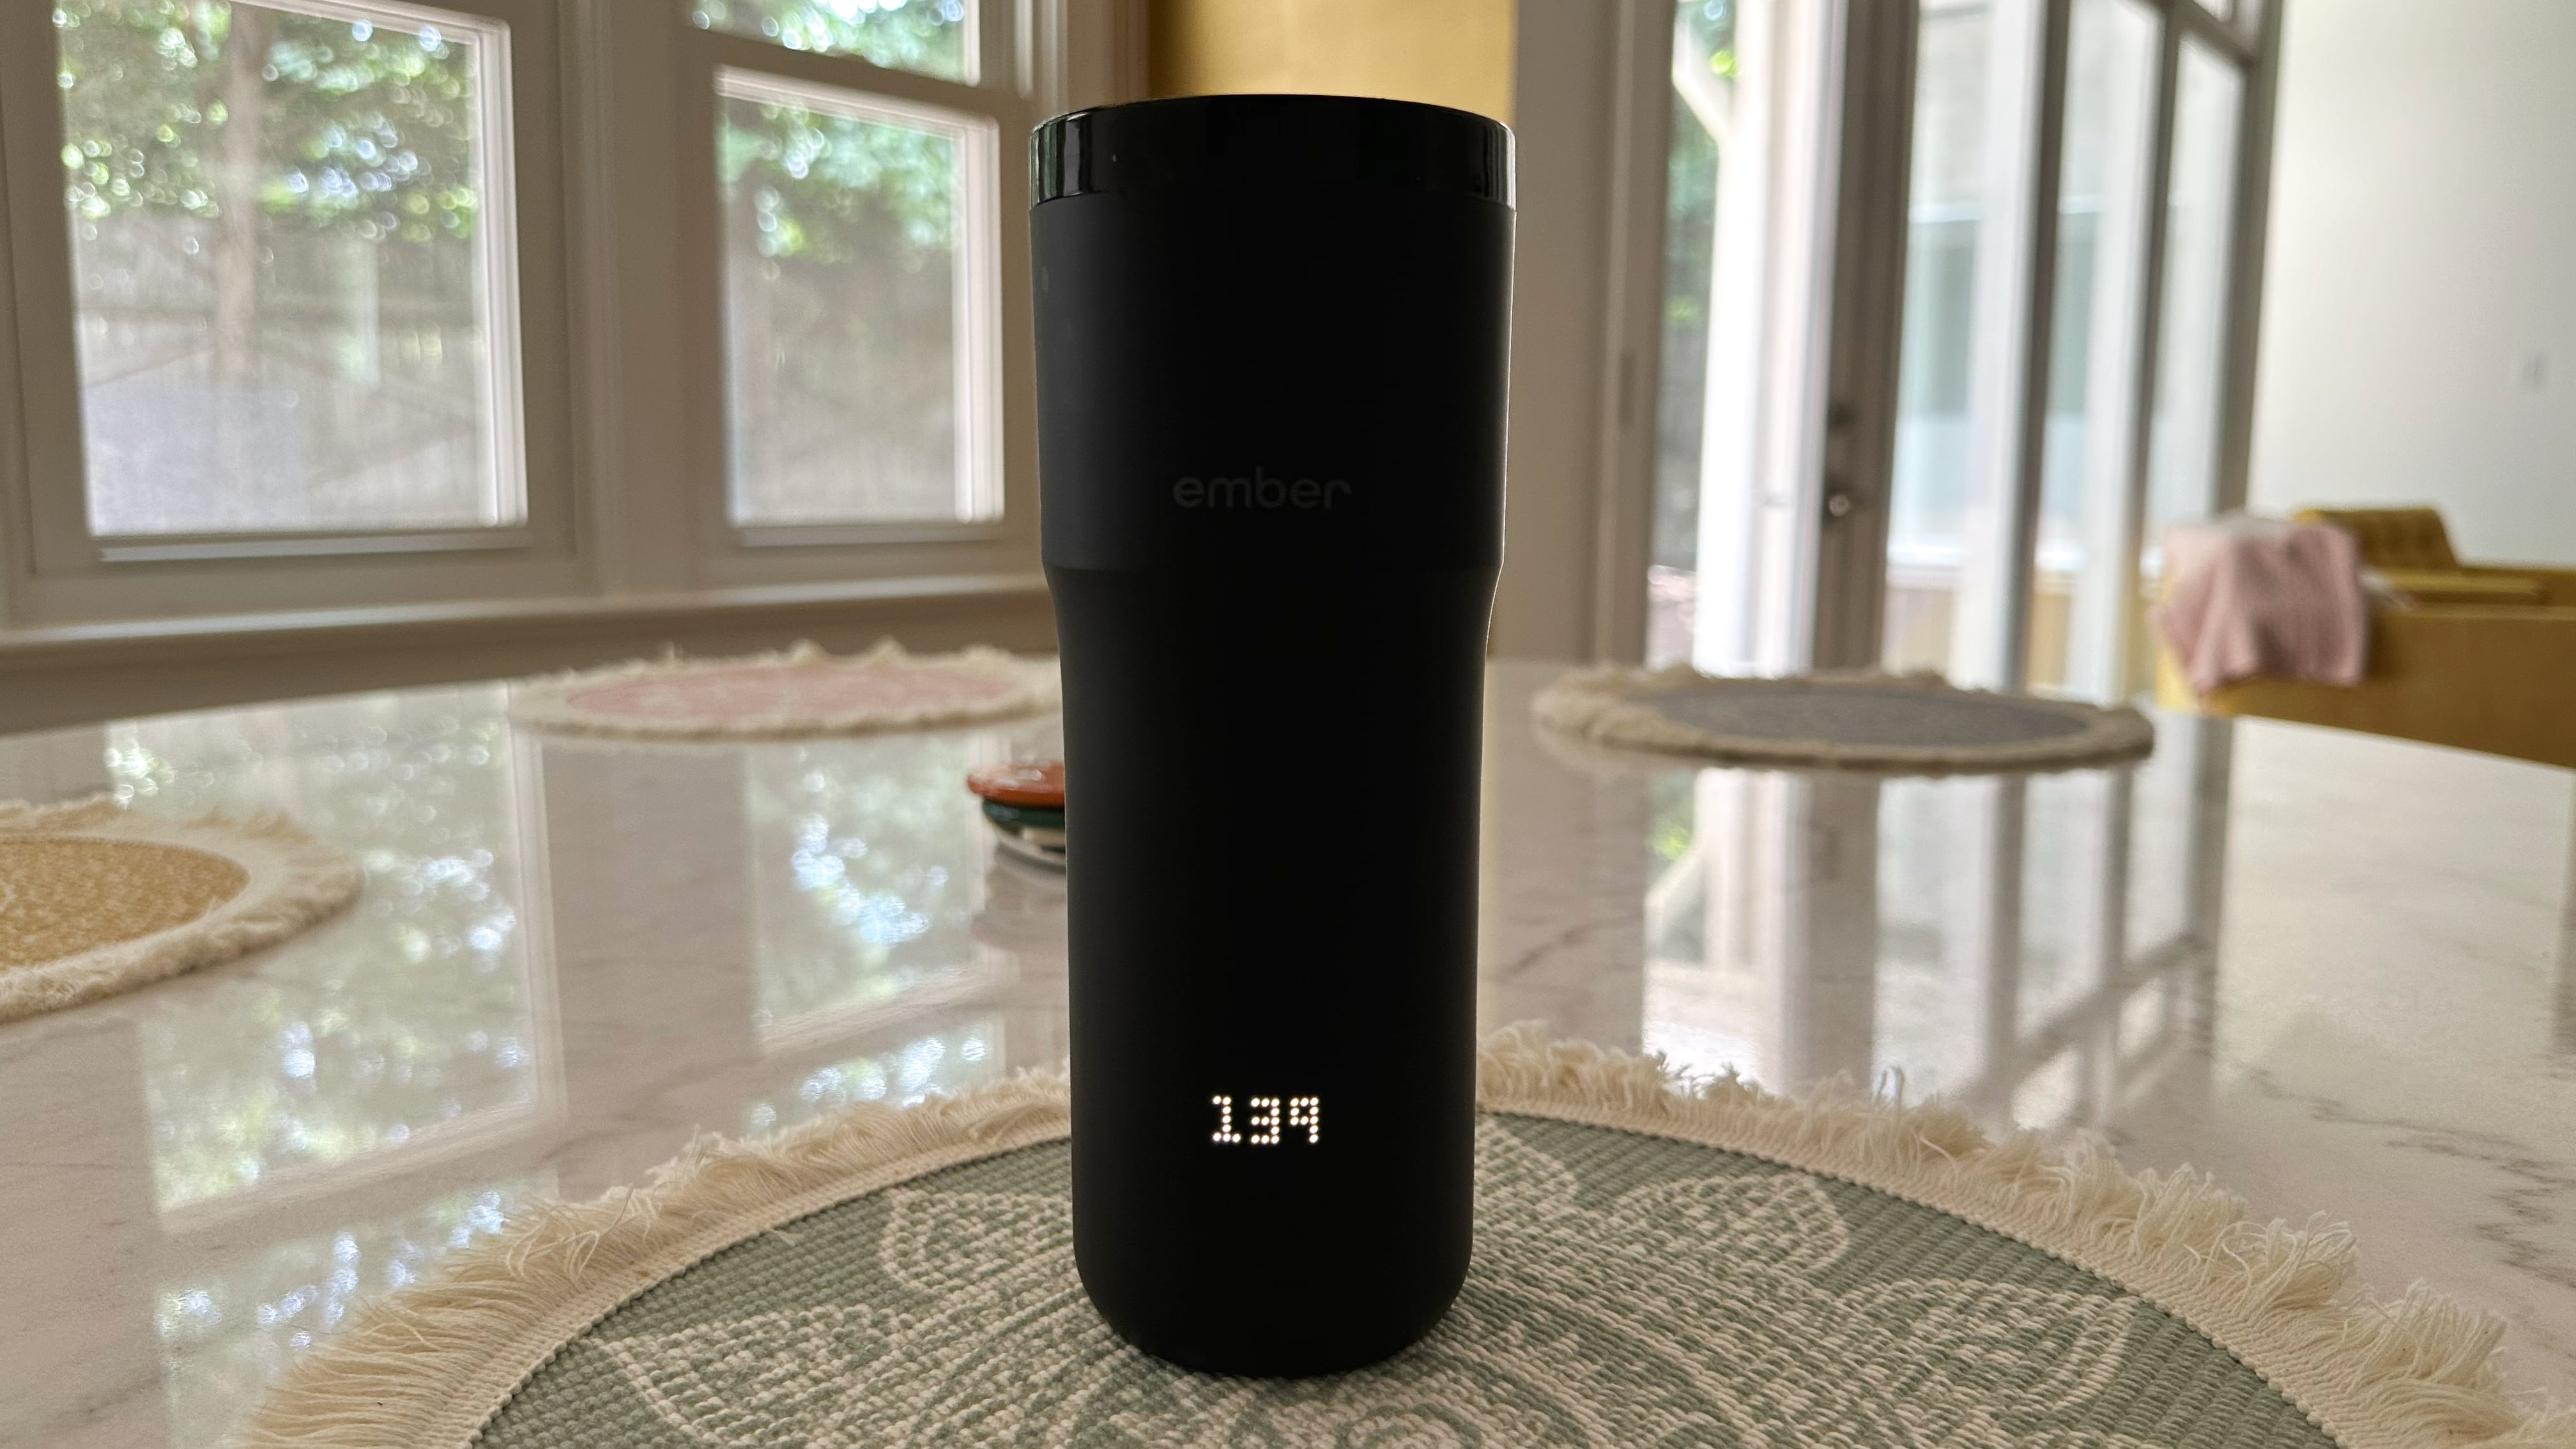 Ember Travel Mug 2+ coffee thermos works with Apple Find My so you